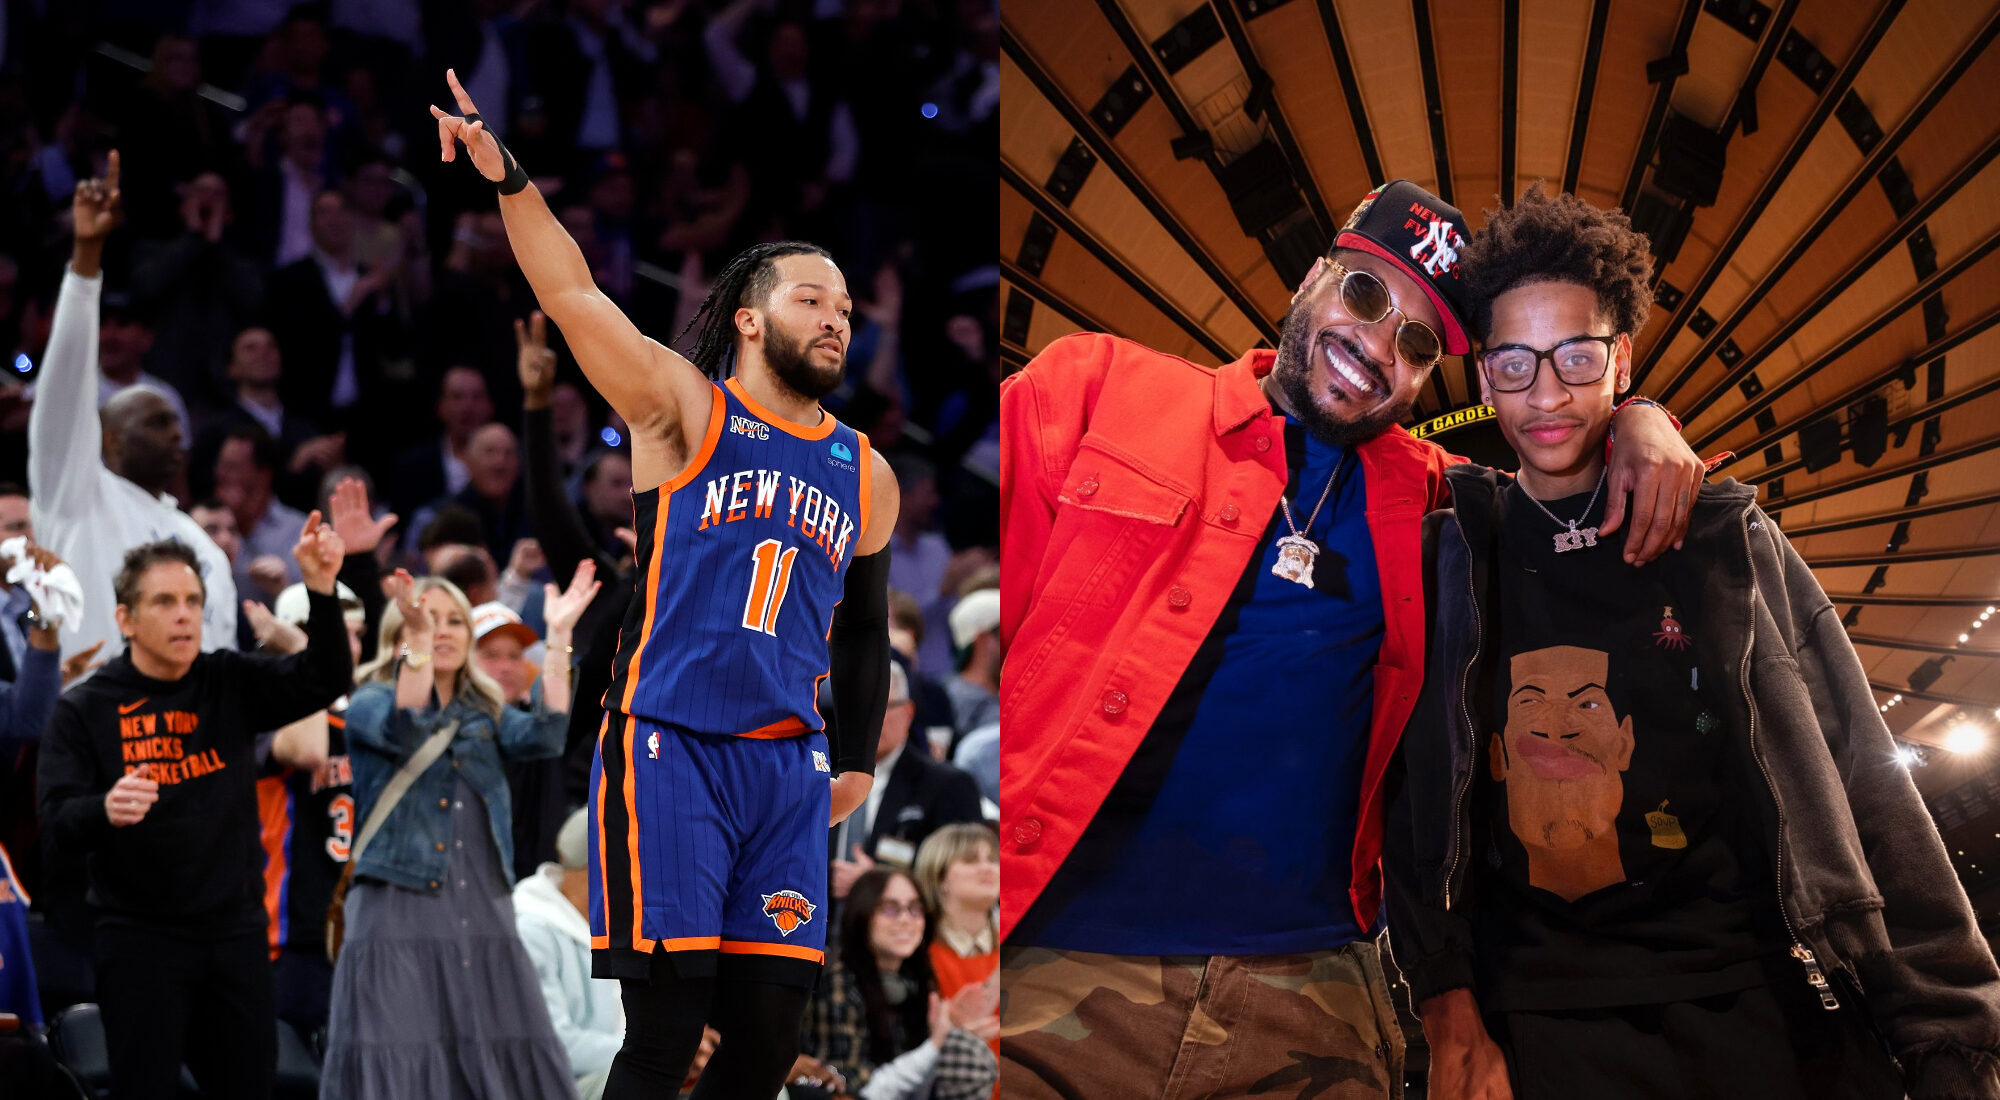 Knicks Game 5 Victory: Carmelo Anthony Celebrates with Son Kiyan at MSG